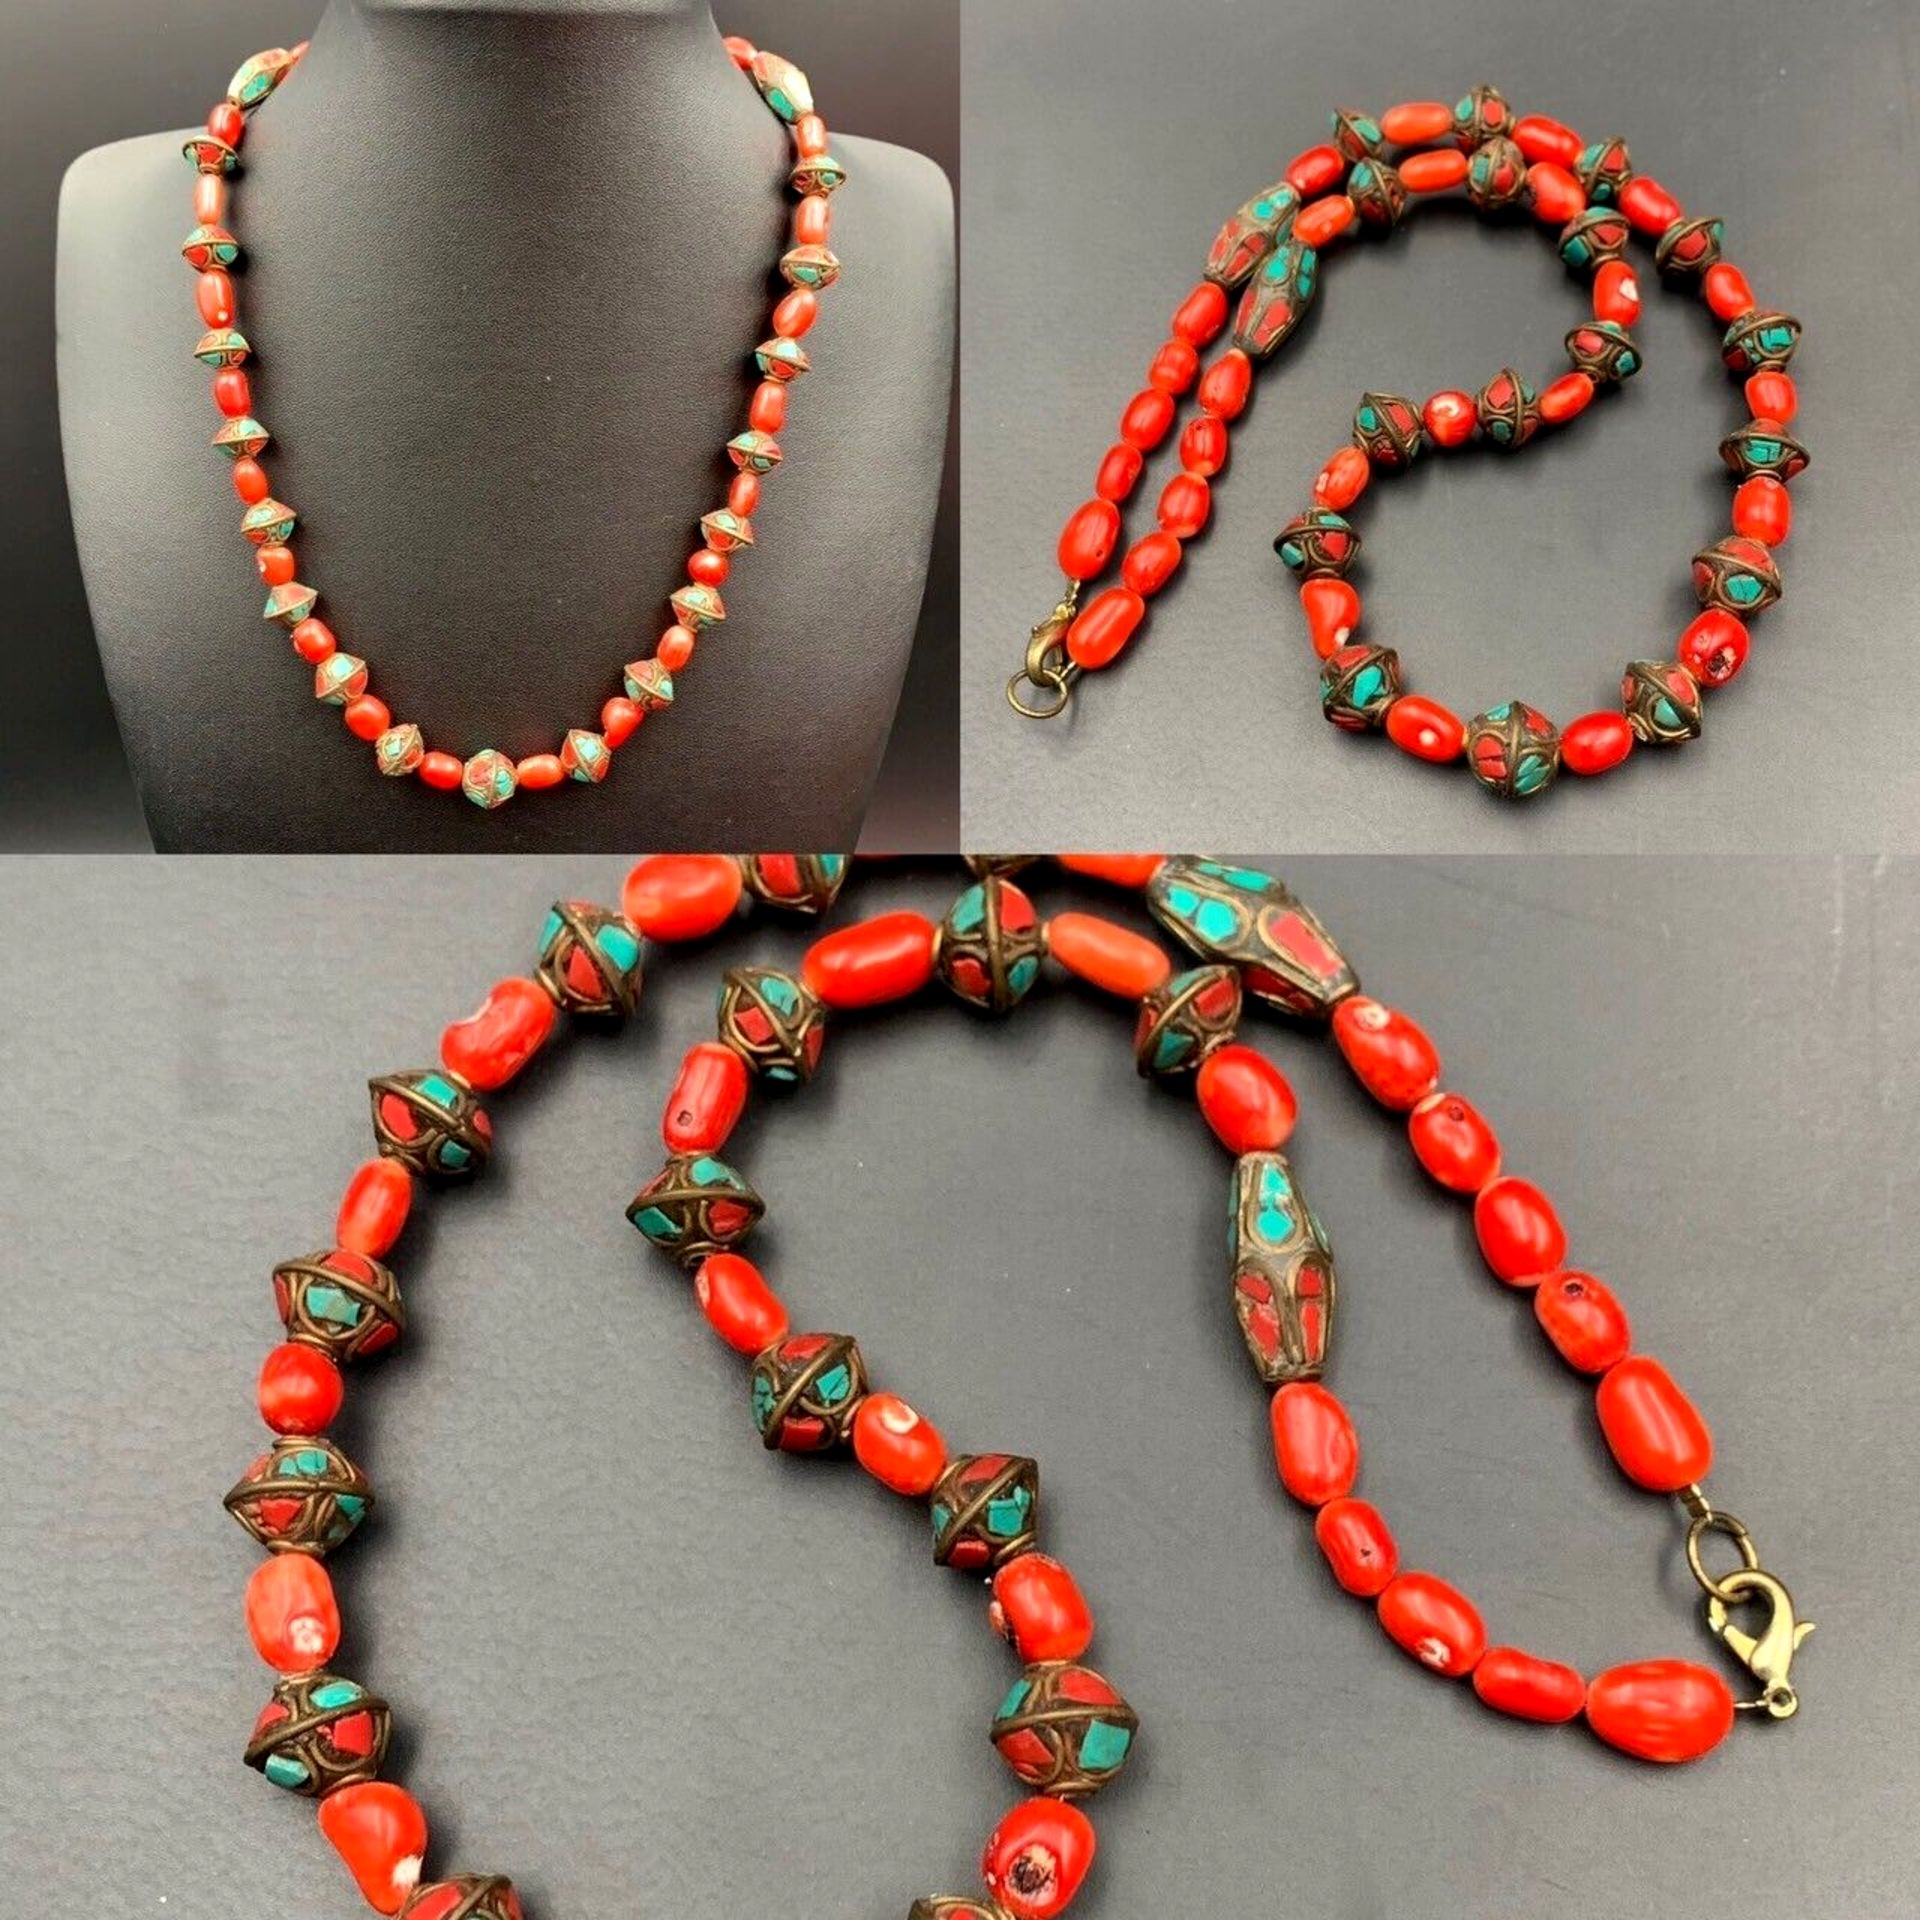 Awesome Natural Dyed Coral With Nepalese Handmade Vintage Beads Necklace. - Image 5 of 5